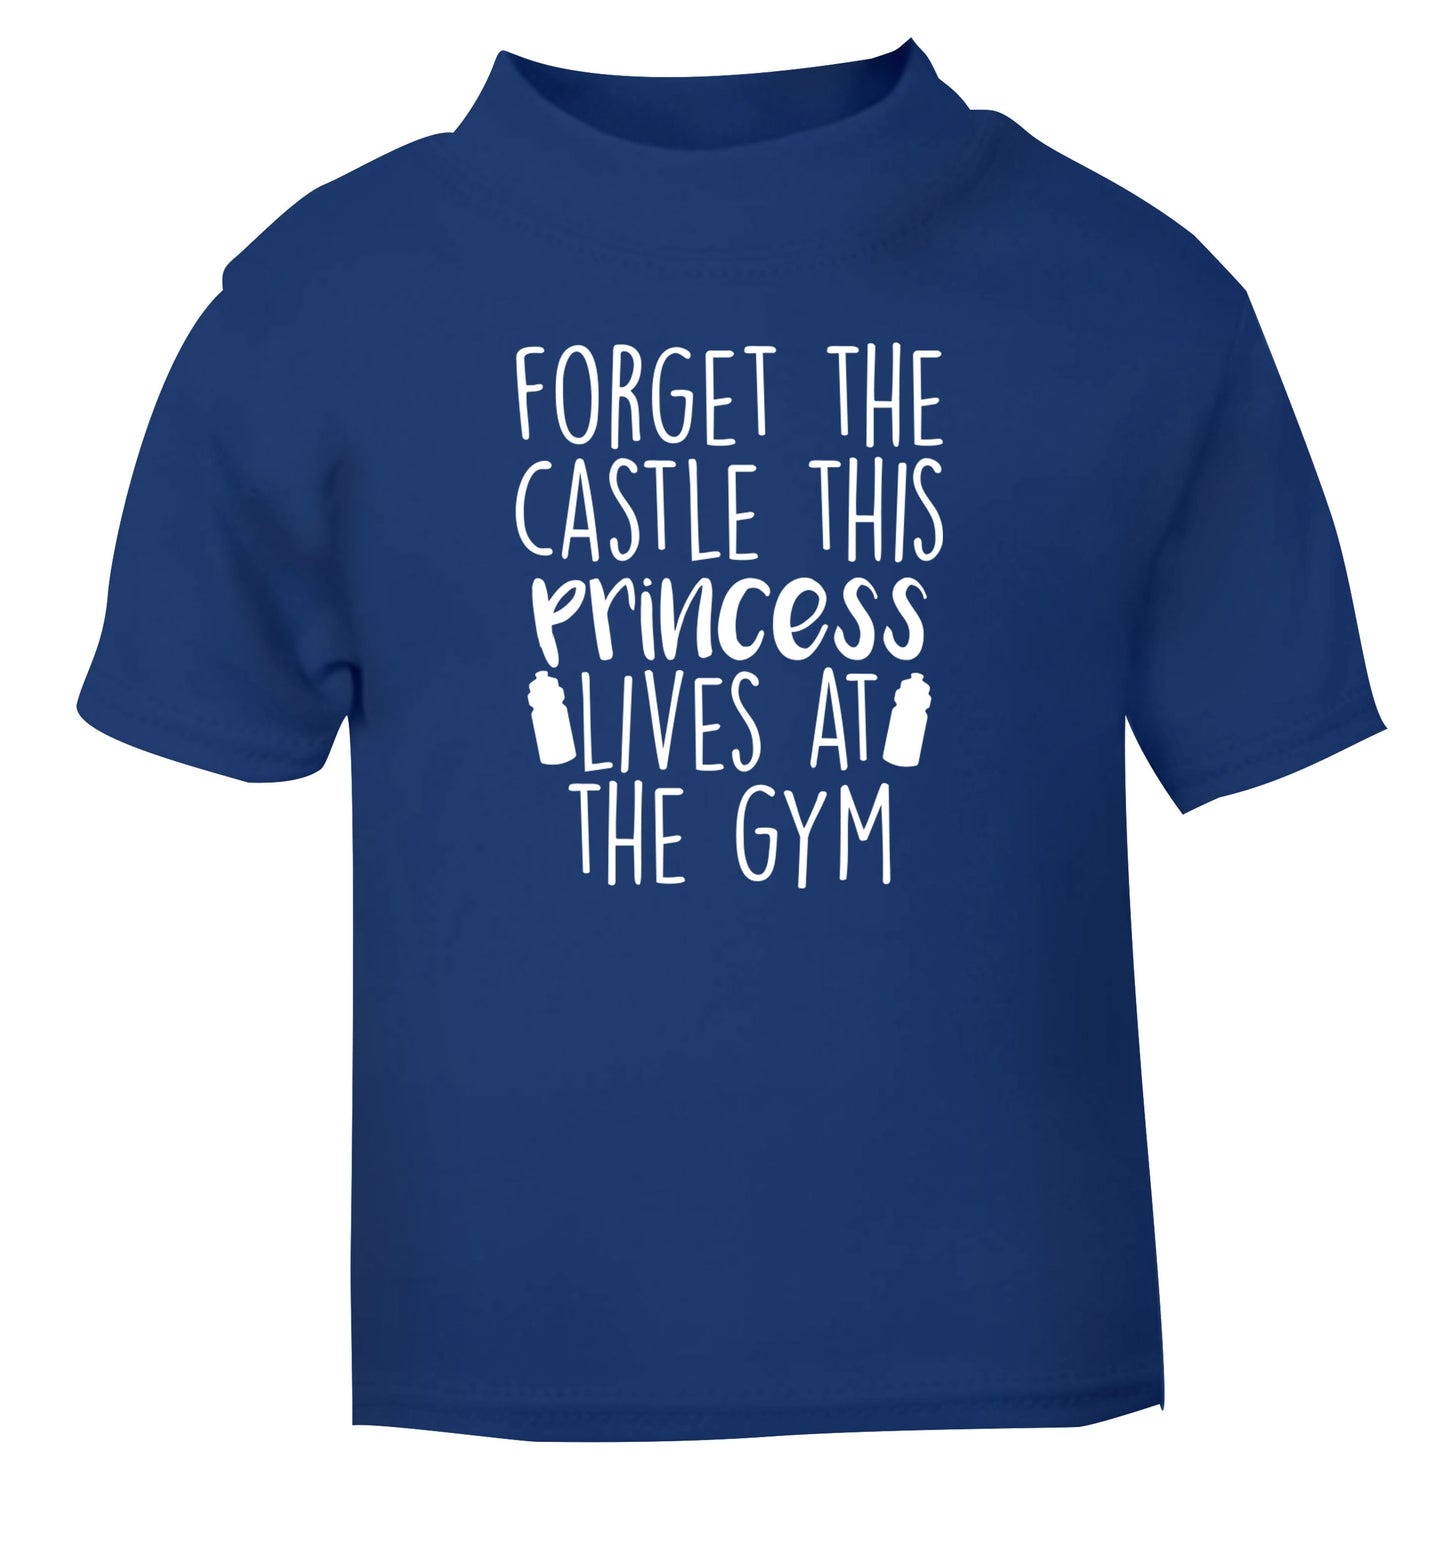 Forget the castle this princess lives at the gym blue Baby Toddler Tshirt 2 Years